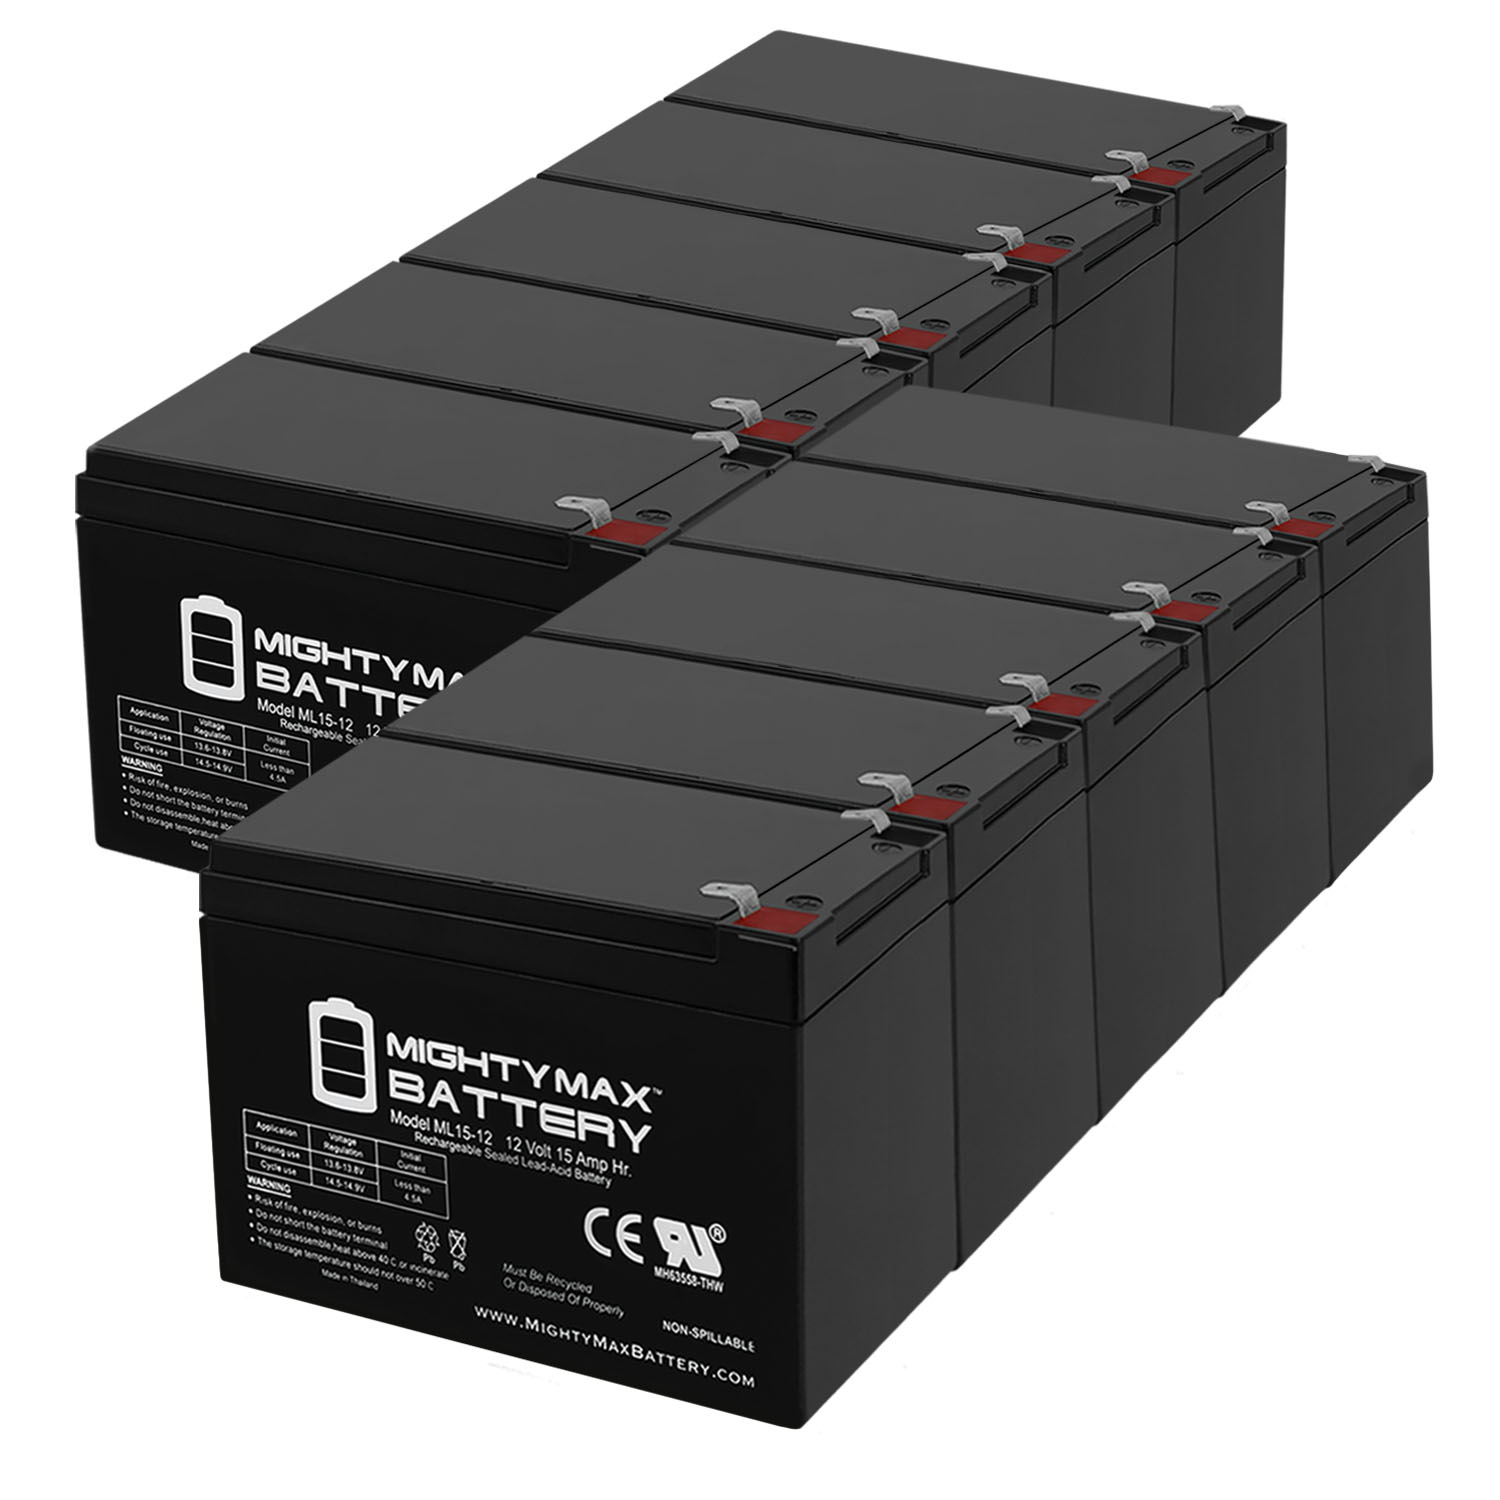 ML15-12 12V 15AH F2 BATTERY REPLACEMENT FOR Bladez PB-SM804, PB-SM 804 - 10 Pack